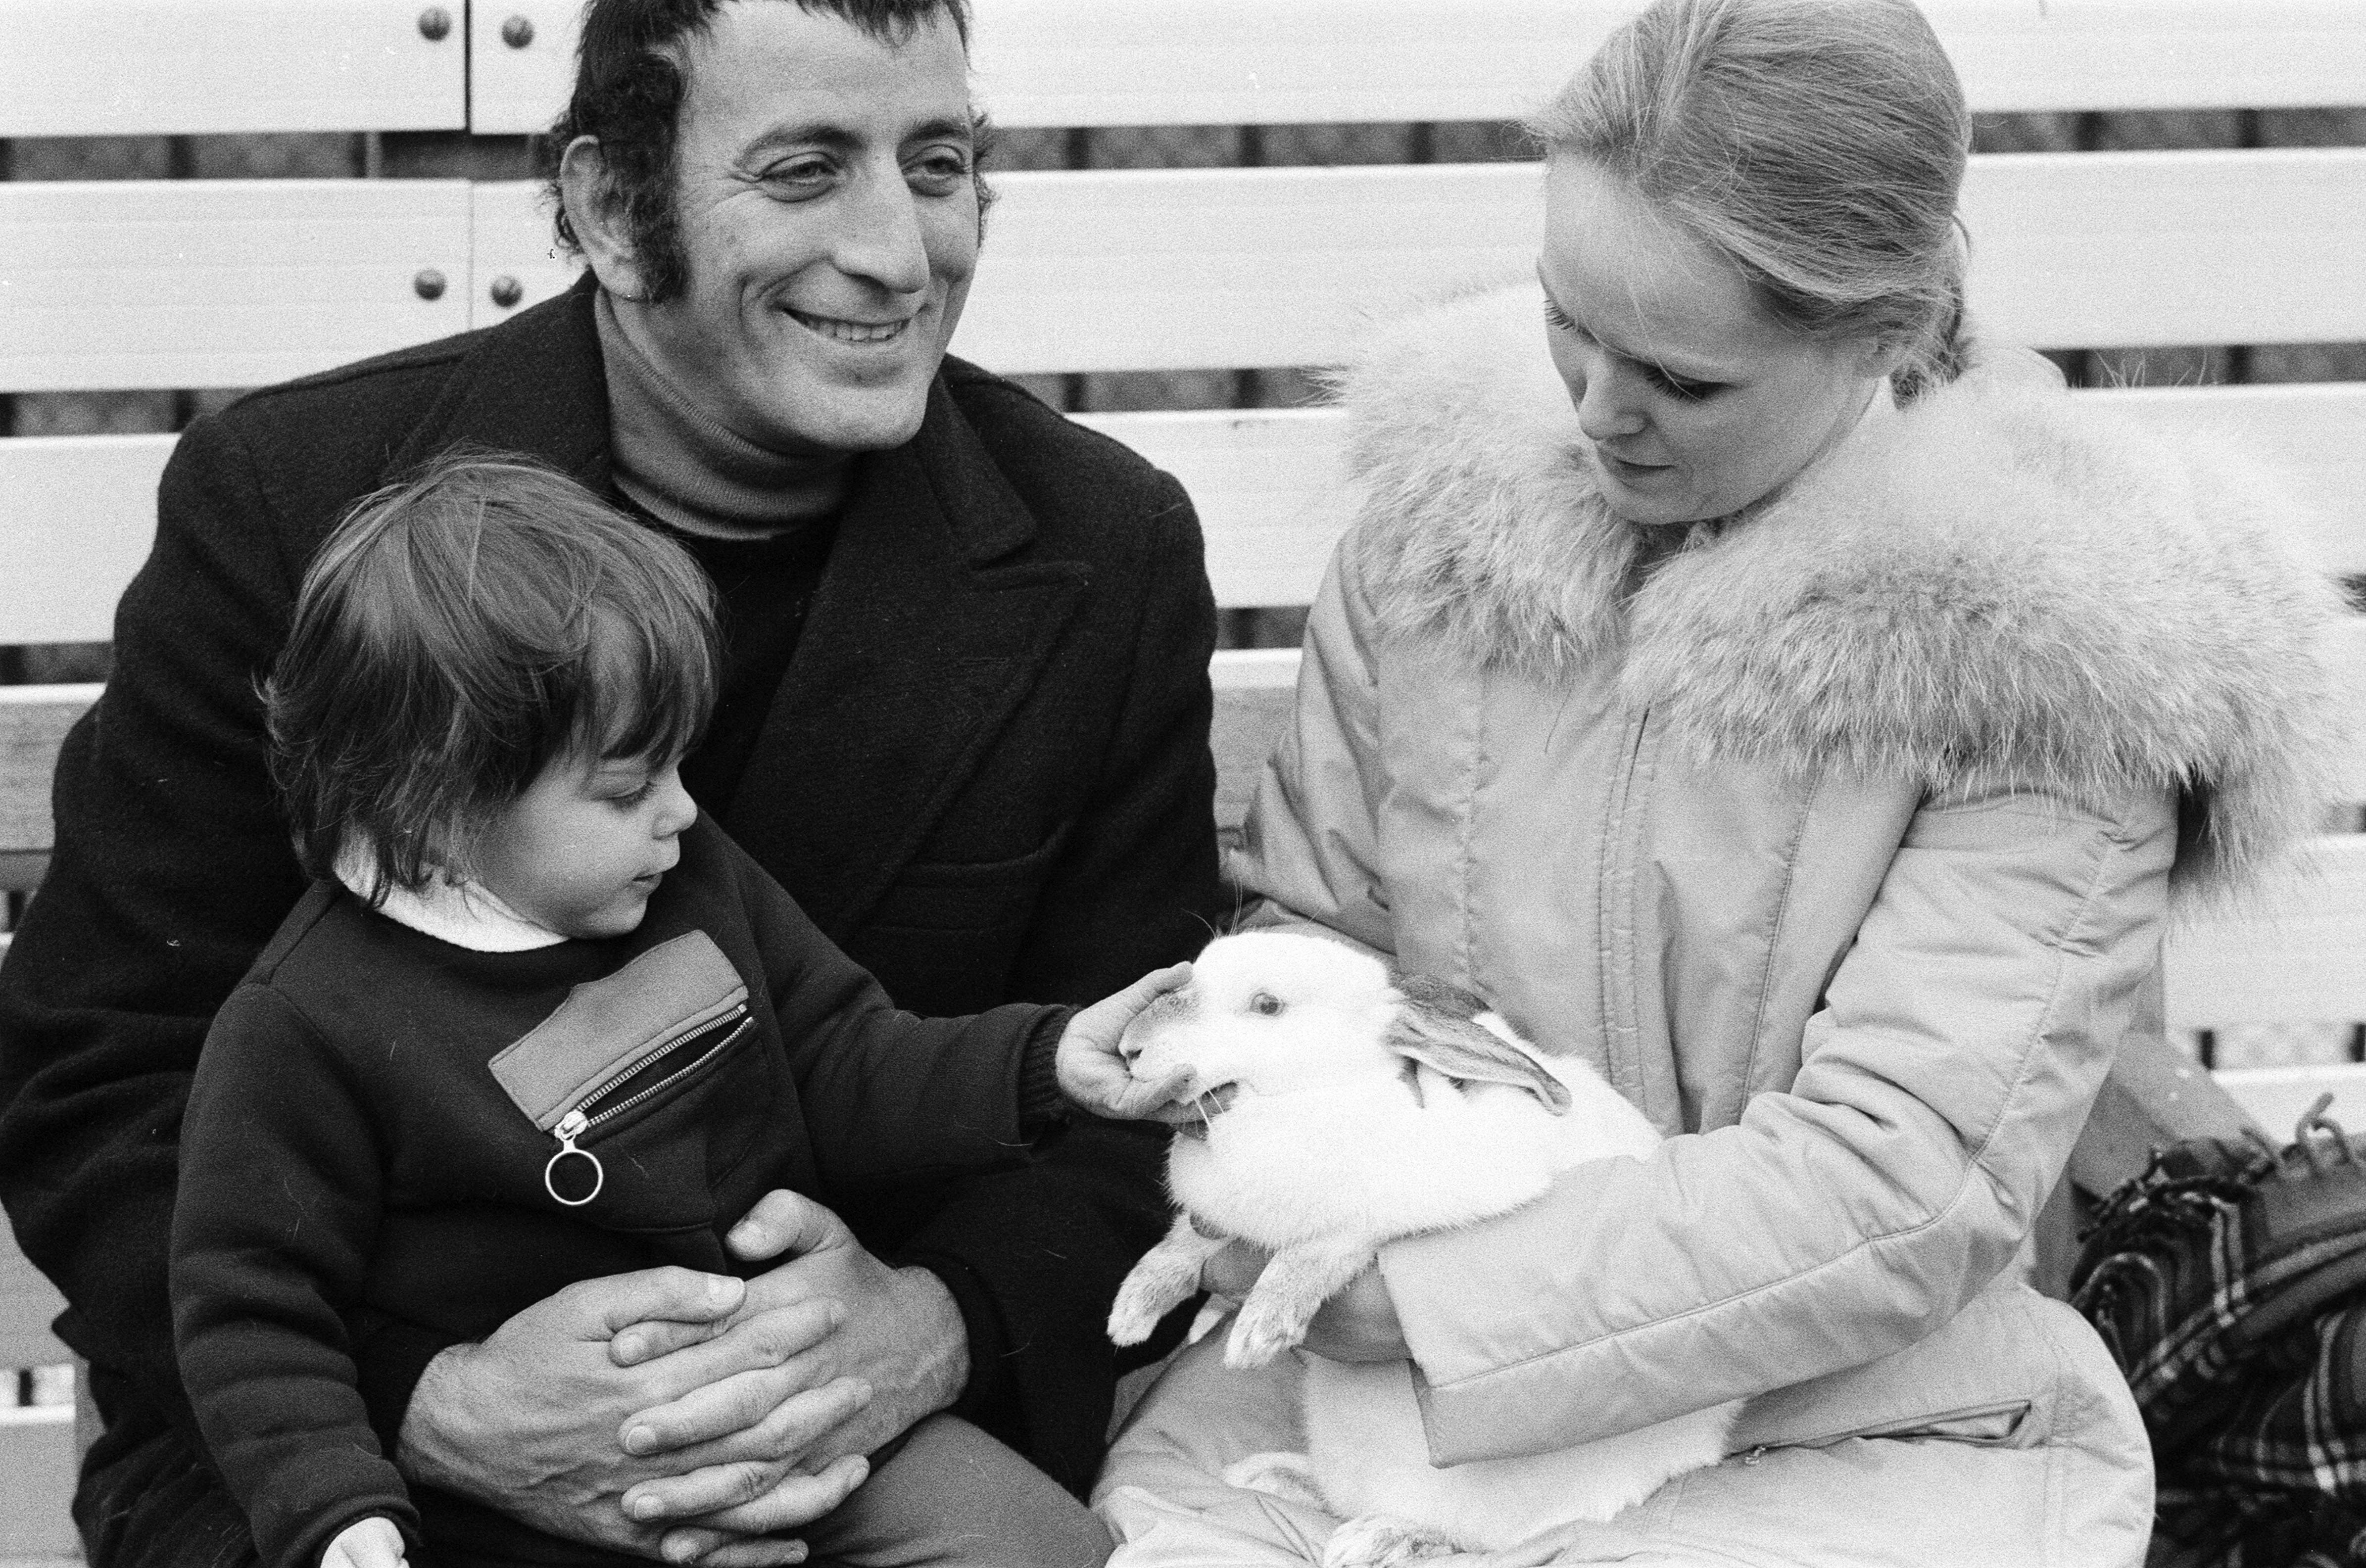 Tony Bennett with his daughter Joanna and wife Sandra Grant at the London Zoo, January 14, 1972 | Source: Getty Images